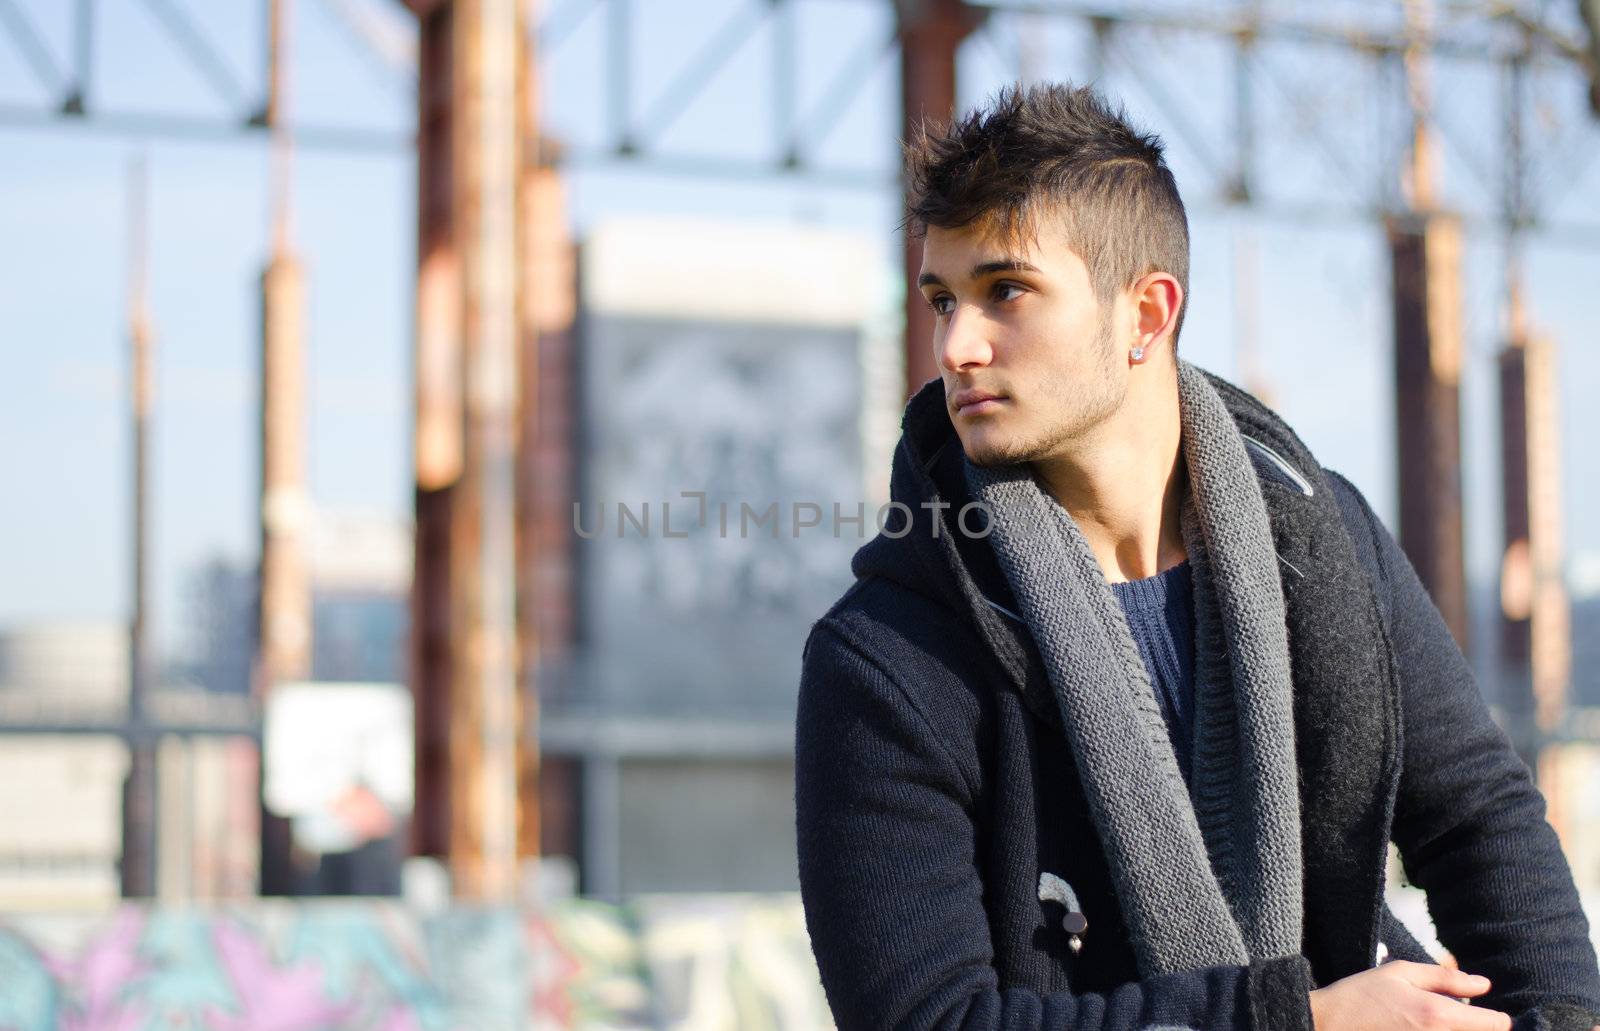 Handsome young man in urban or industrial setting, large copyspace by artofphoto